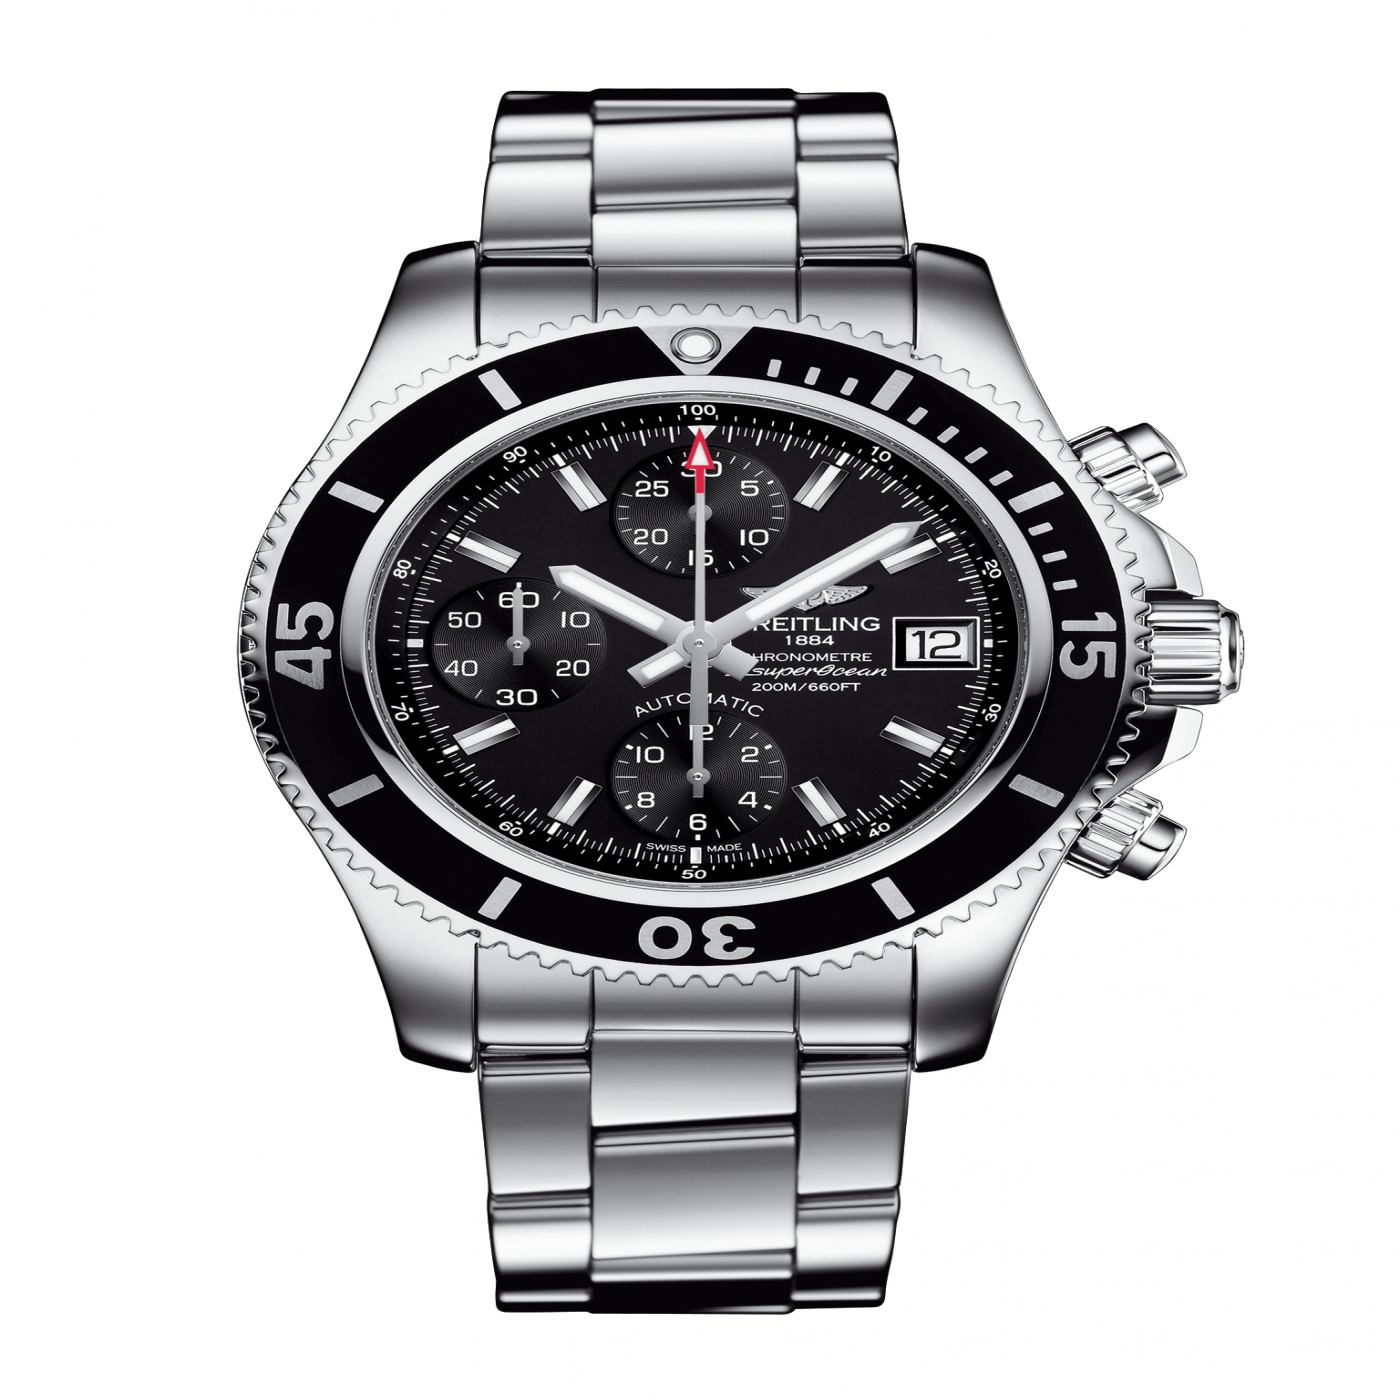 Breitling Superocean Chronograph 42 Automatic Self Wind Chronograph, Date, Hour, Minute, Second Mens watch A13311C91B1A1